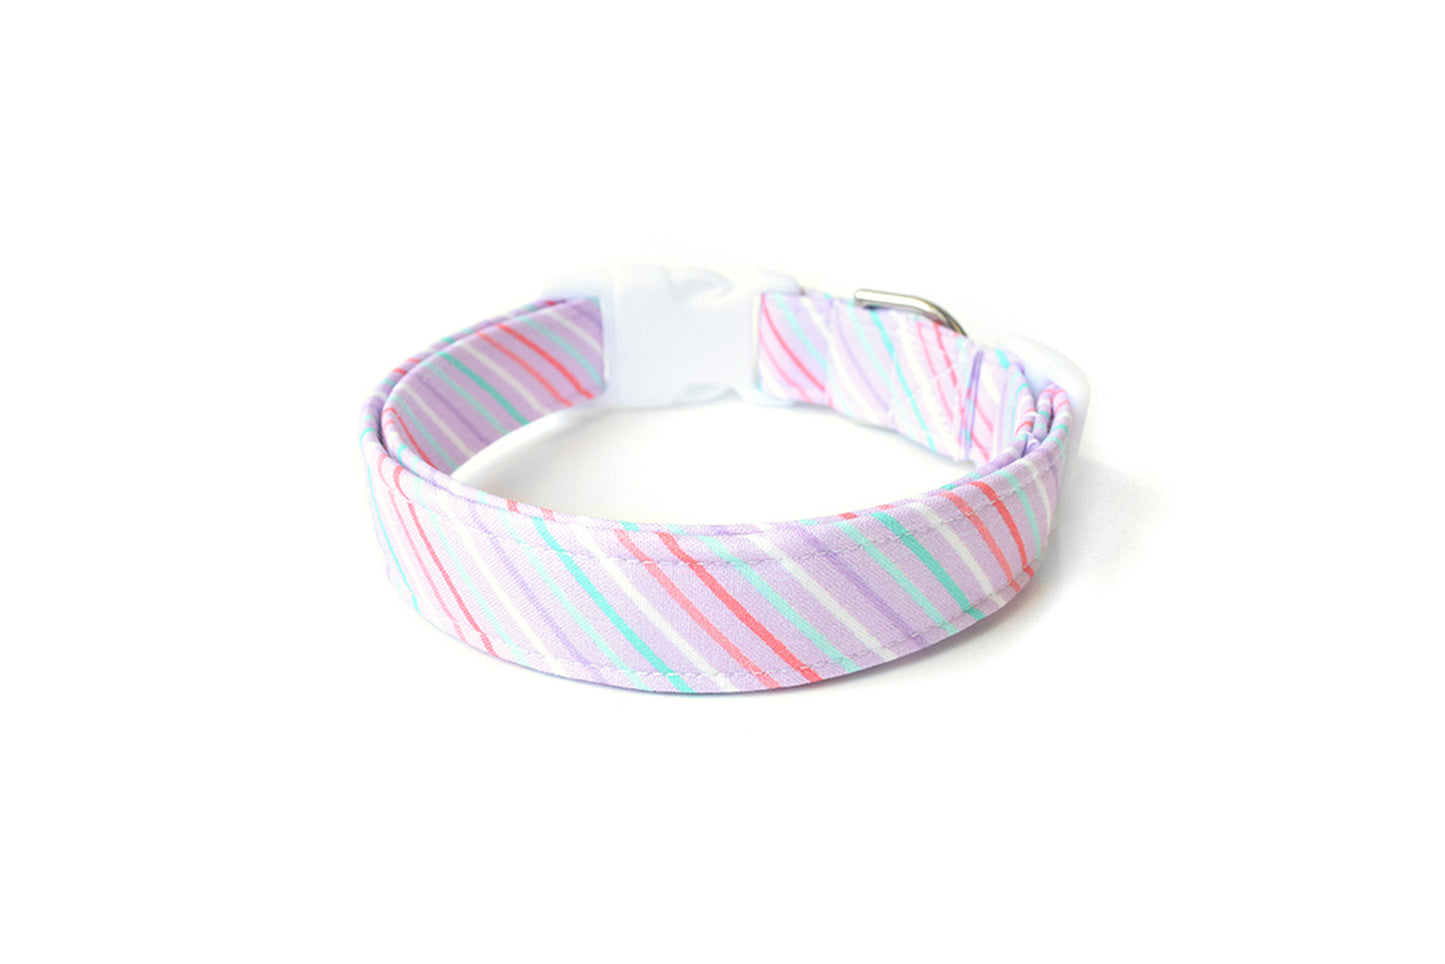 Pastel Purple Dog Collar with Pink, White & Teal Stripes - Handmade by Kira's Pet Shop